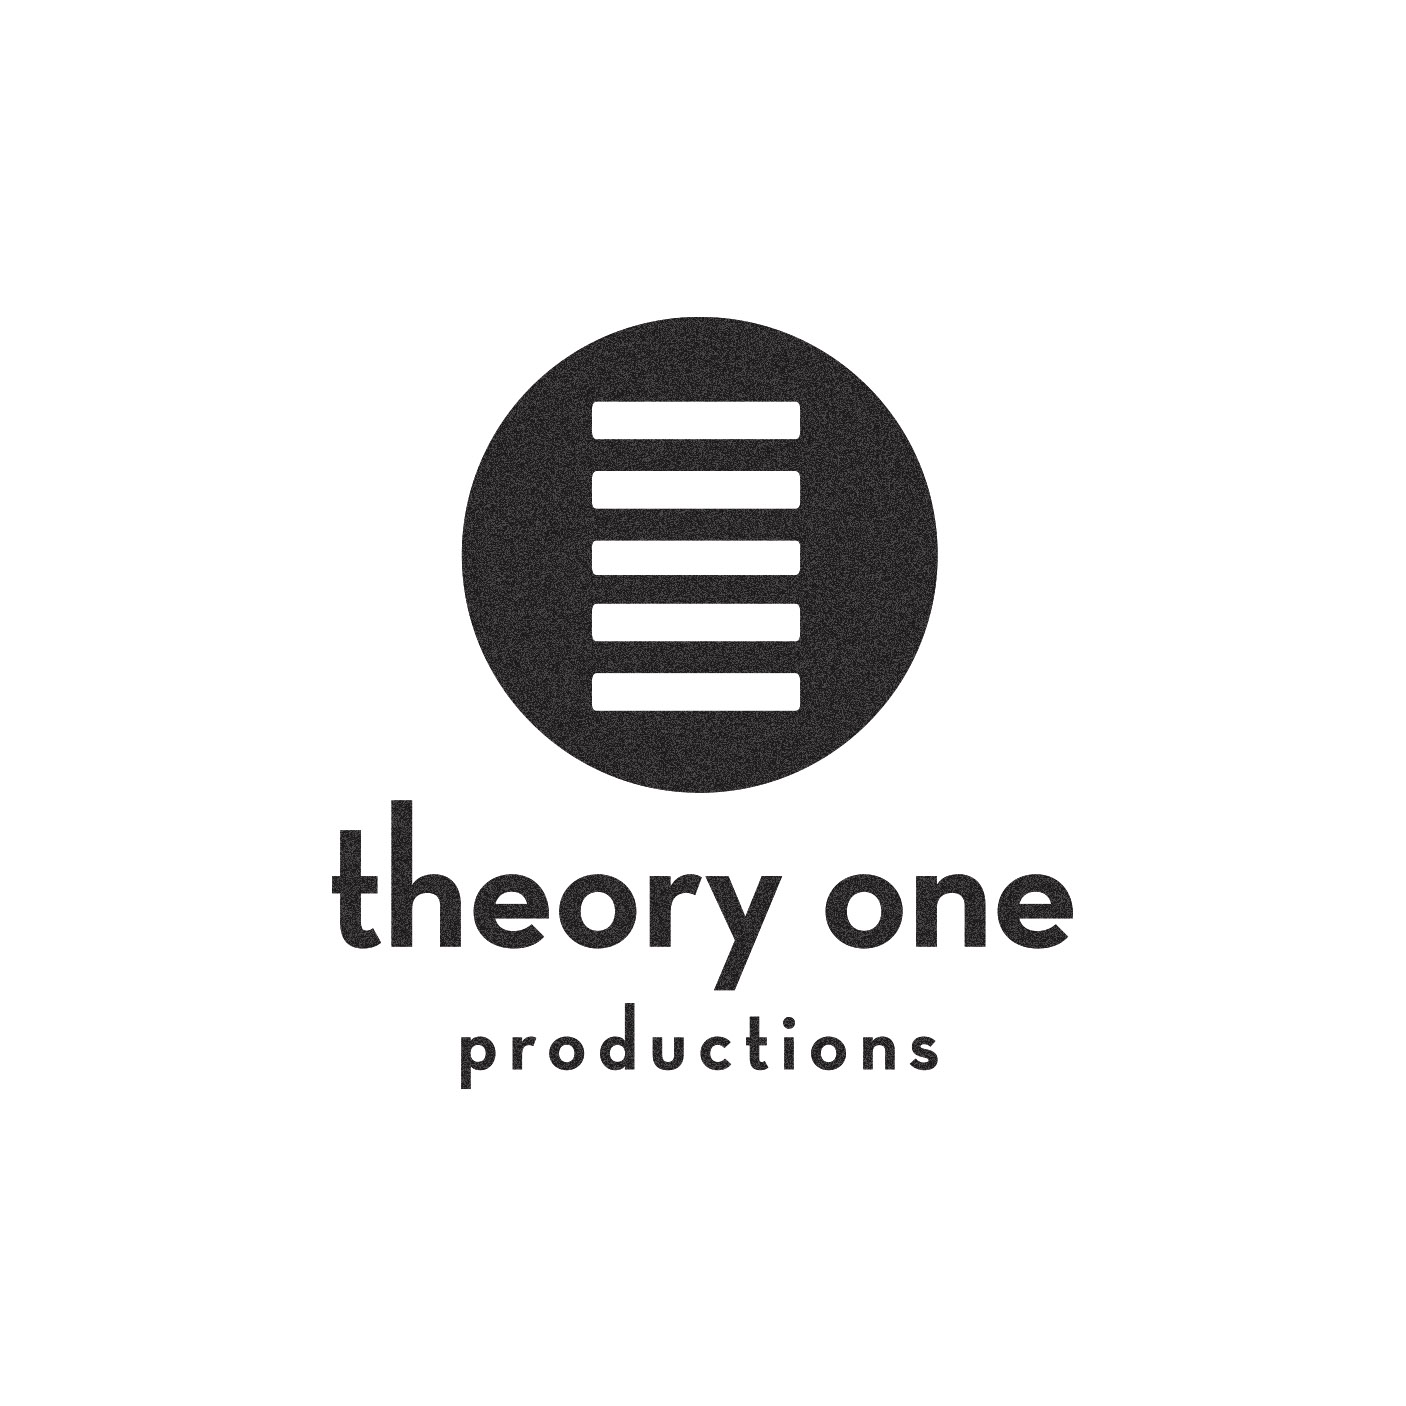 Branding for the audio and production company, Theory One.